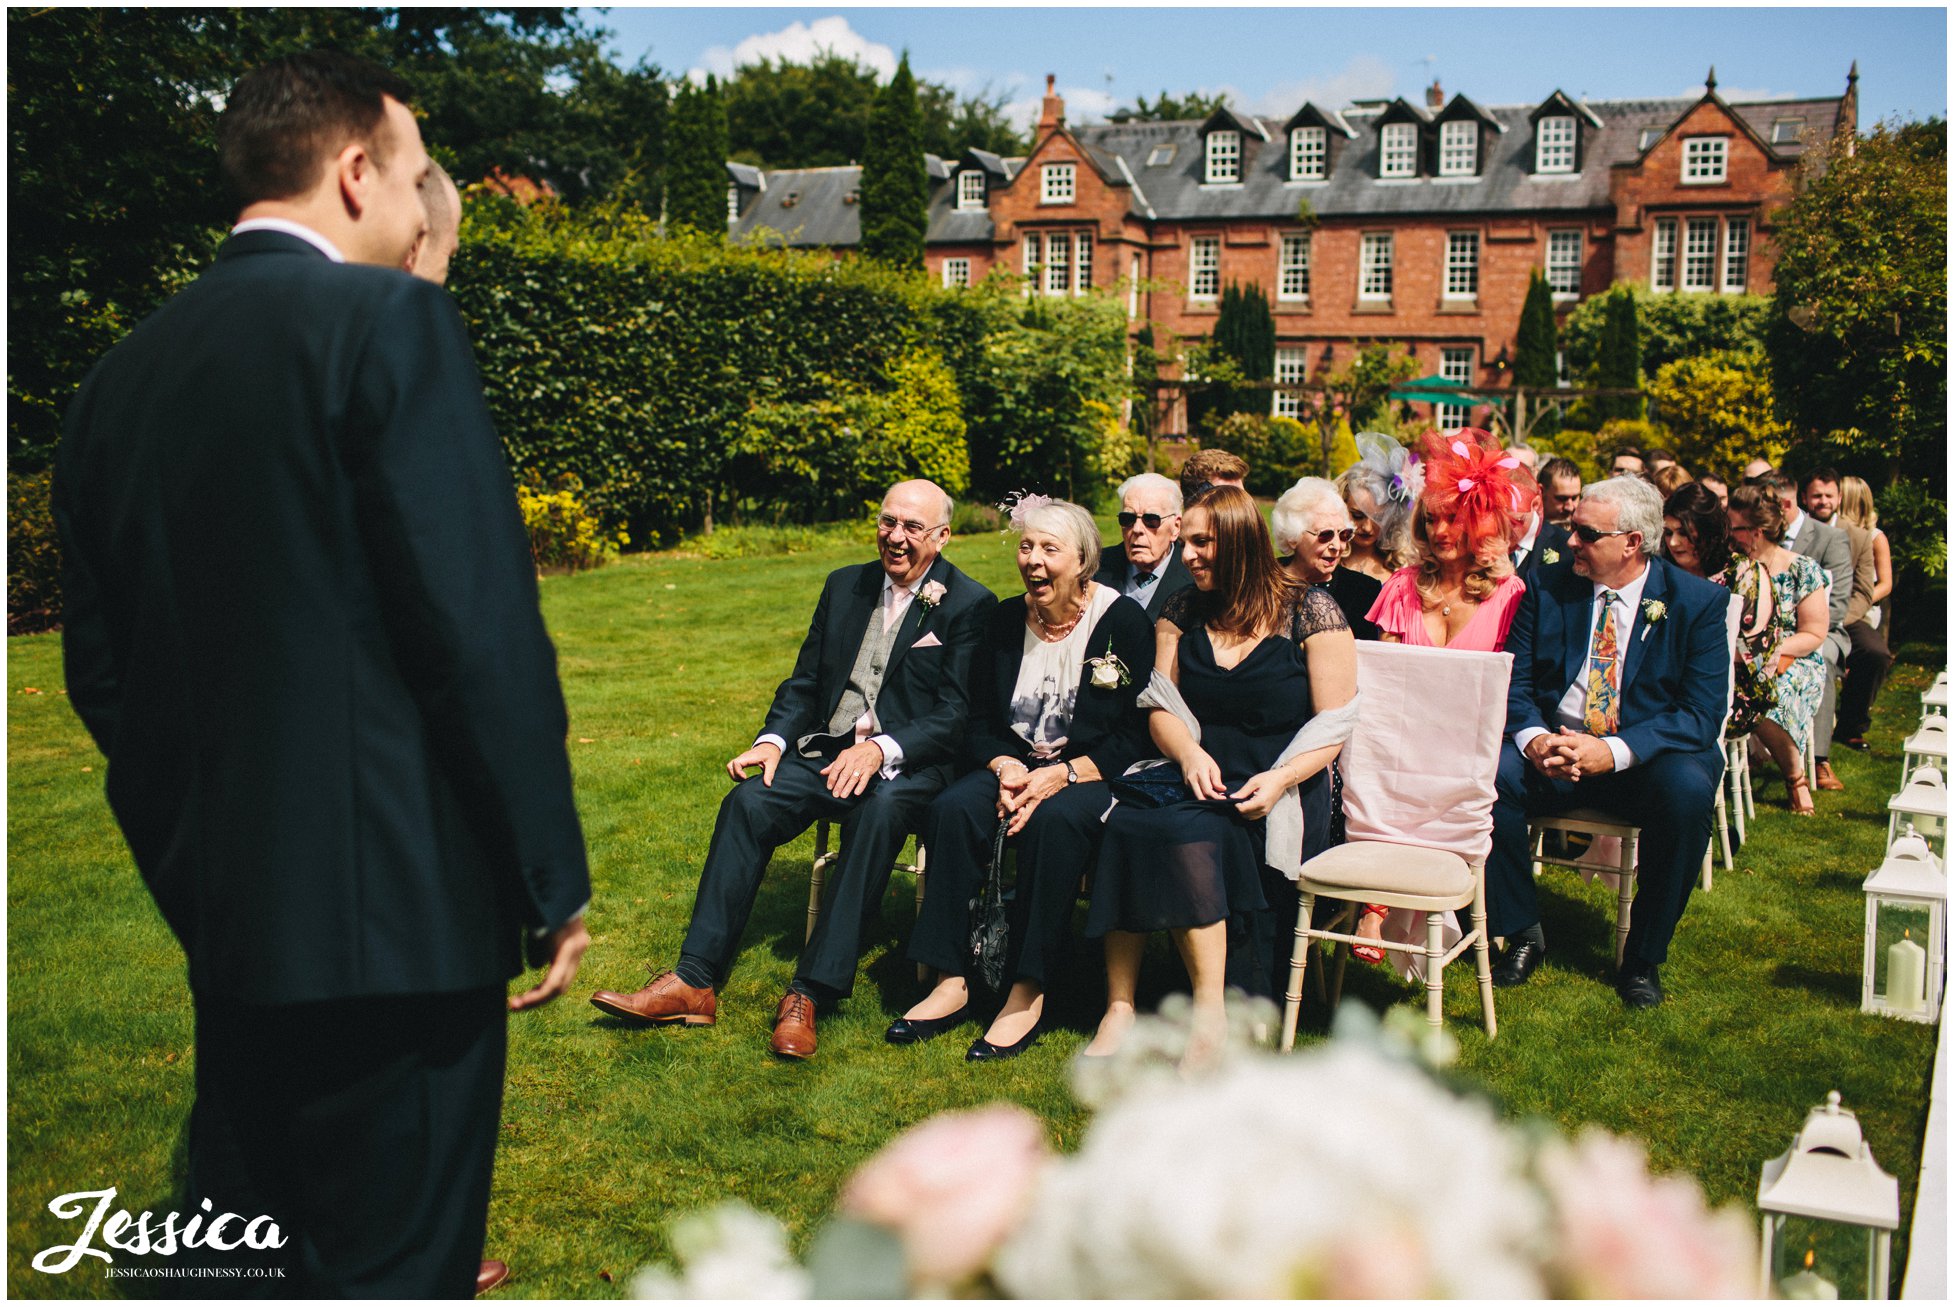 cheshire wedding photography - guests seated ready for ceremony